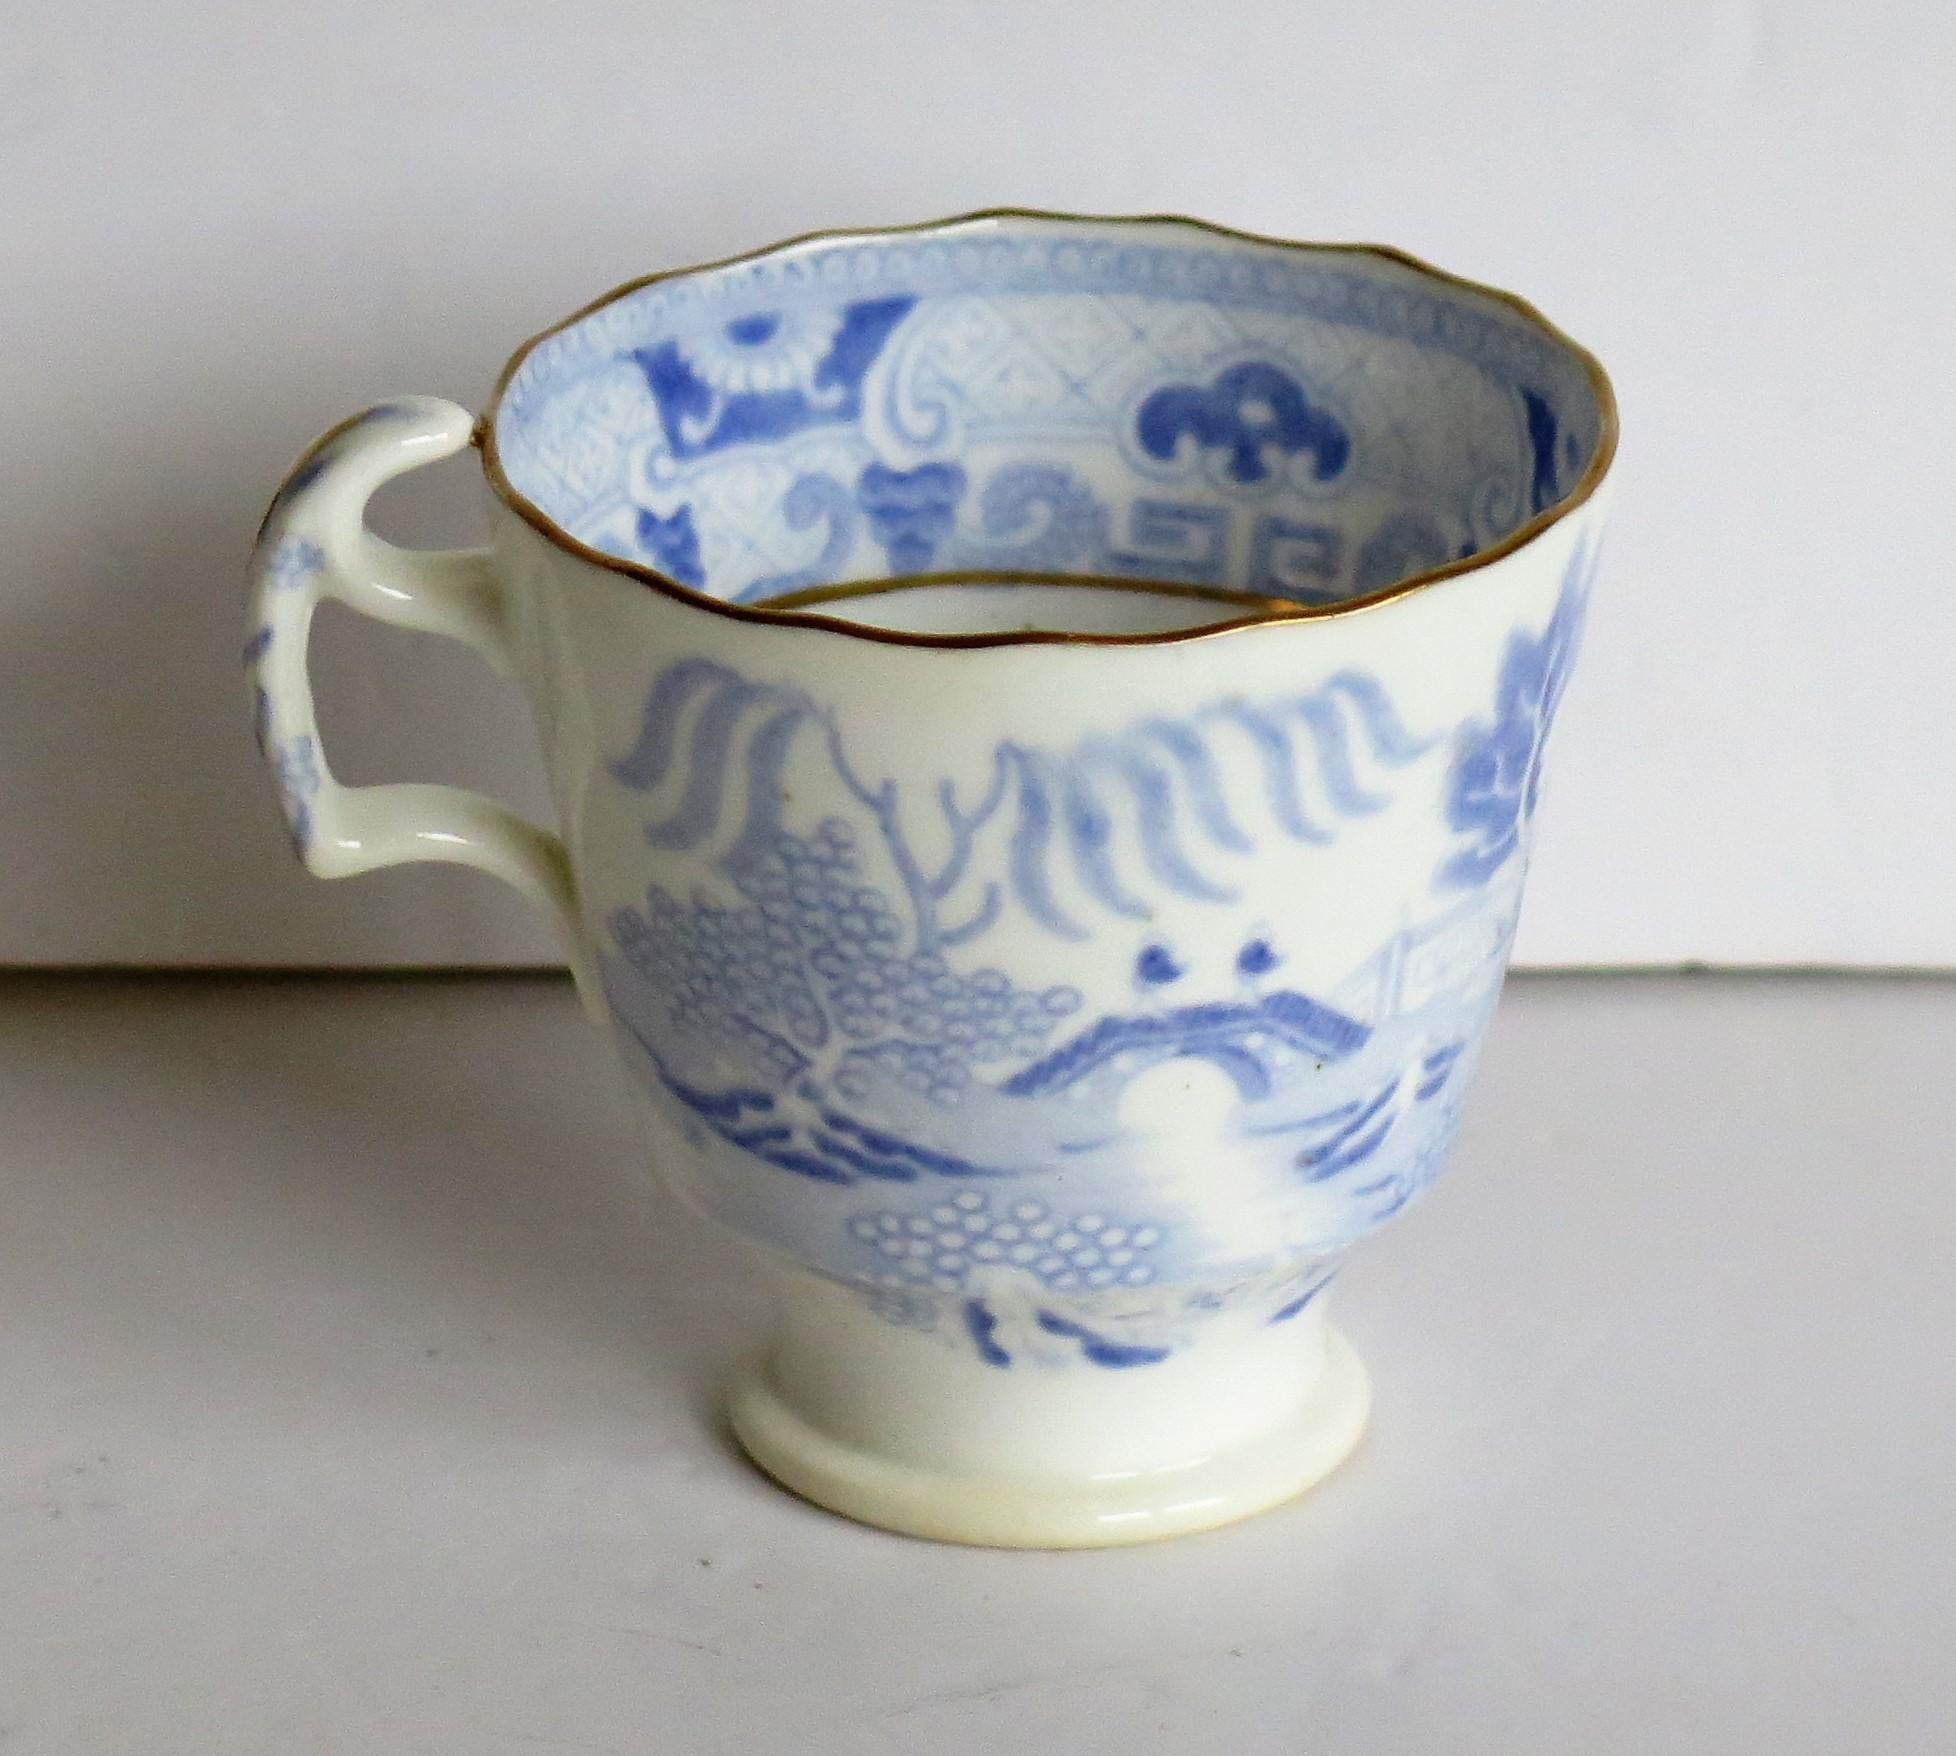 English Miles Mason Porcelain Cup and Saucer Blue Broseley Willow Pattern, circa 1815